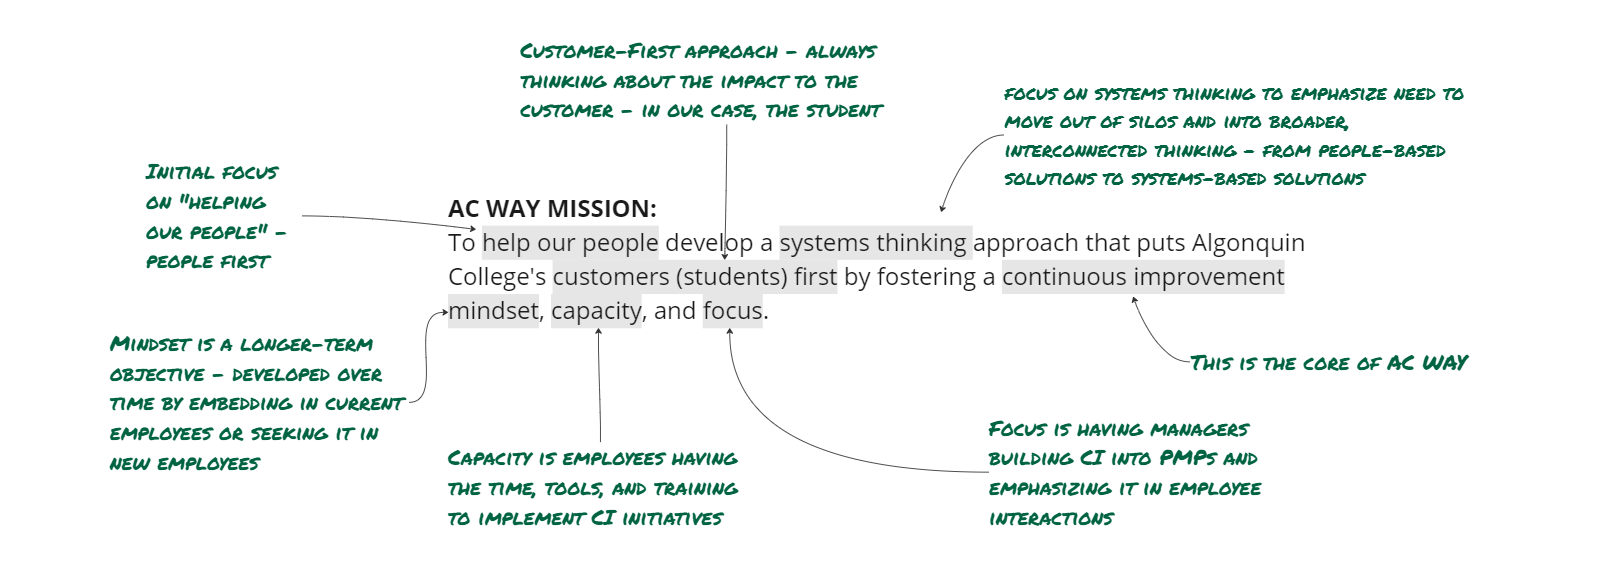 AC Way Mission - To help our people develop a systems thinking approach that puts Algonquin College's customers (students) first by fostering a continuous improvement mindset, capacity, and focus.